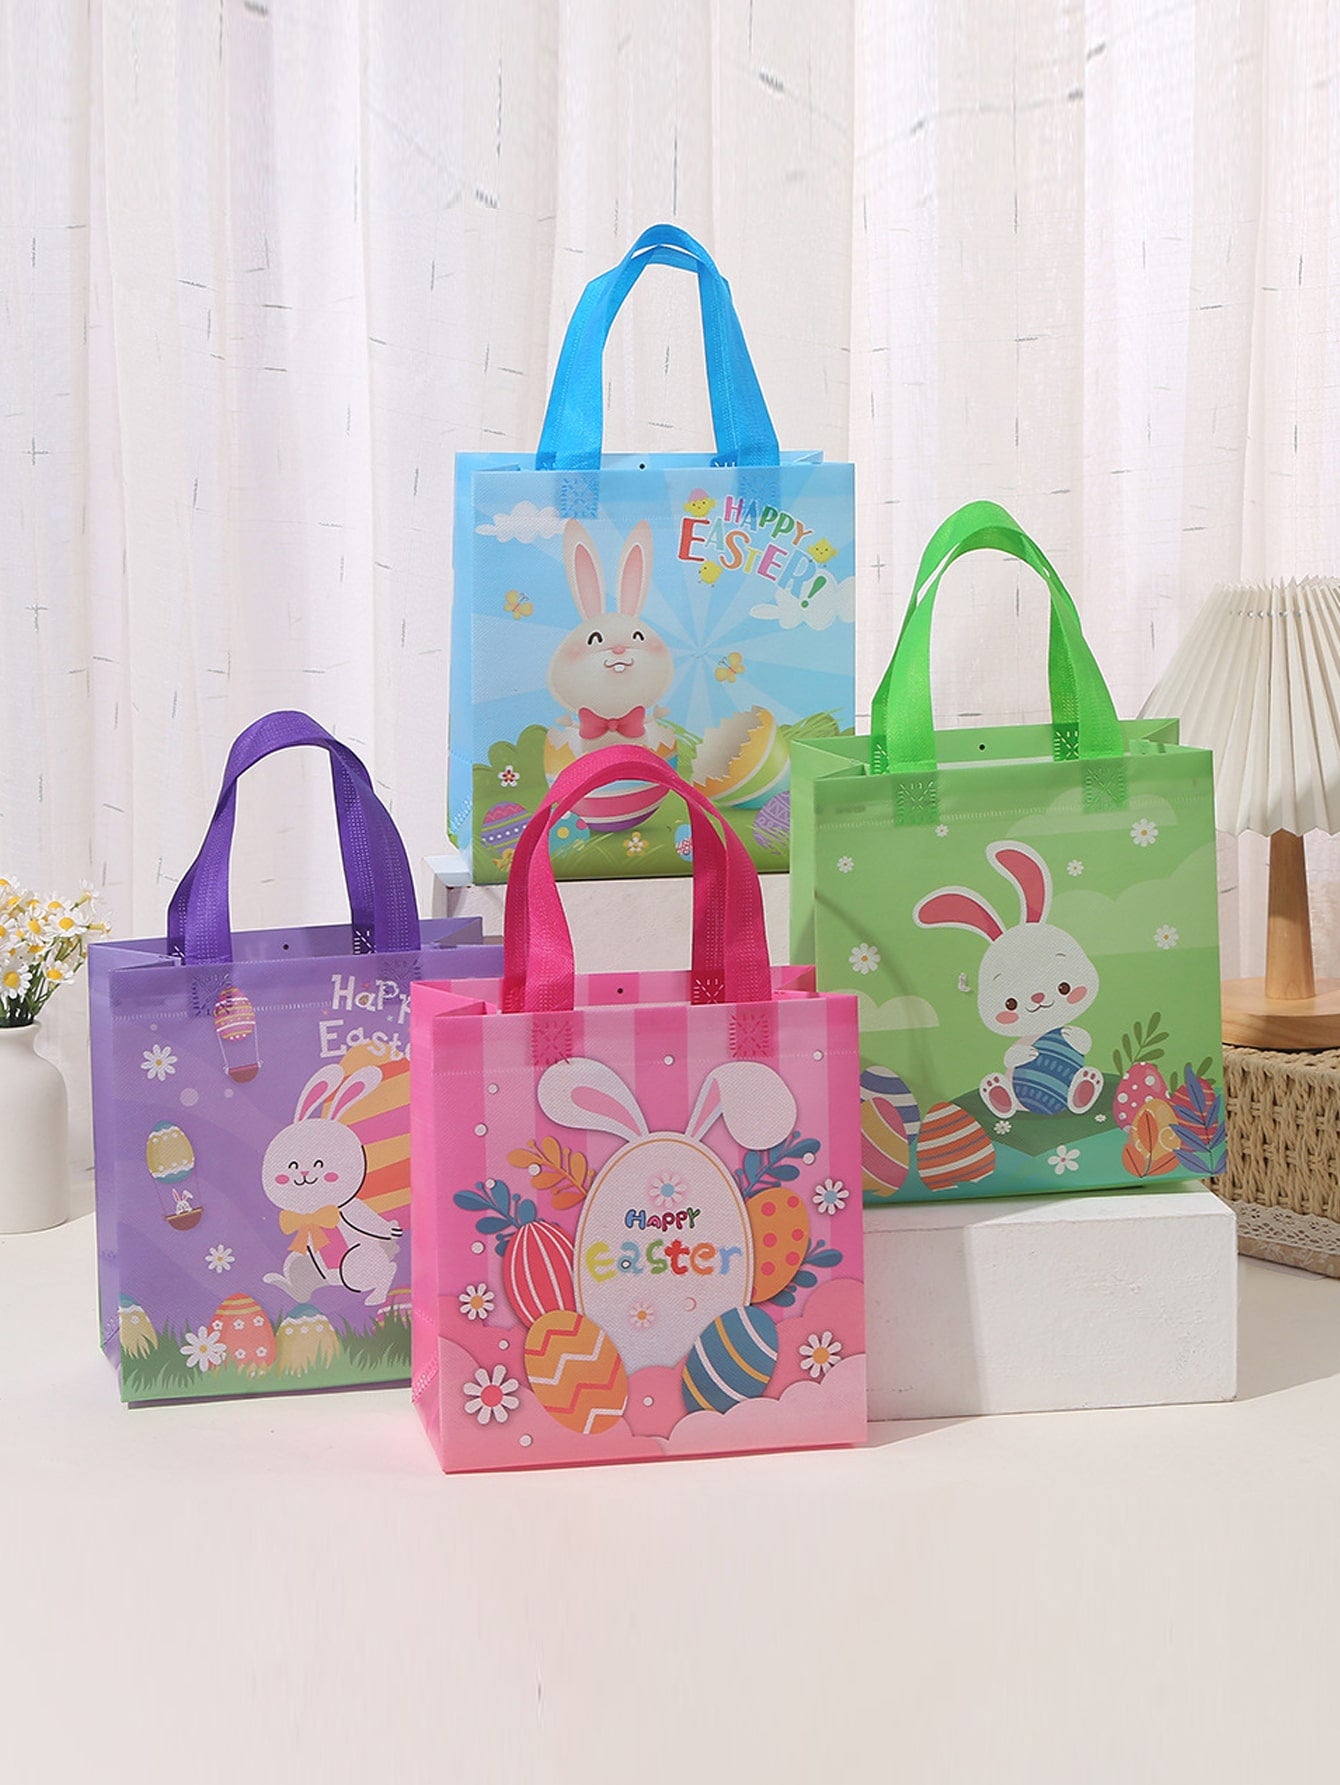 4pcs Easter Rabbit Egg Pattern Gift Bag Cartoon Cute Gift Wrapping Bag For Easter Party